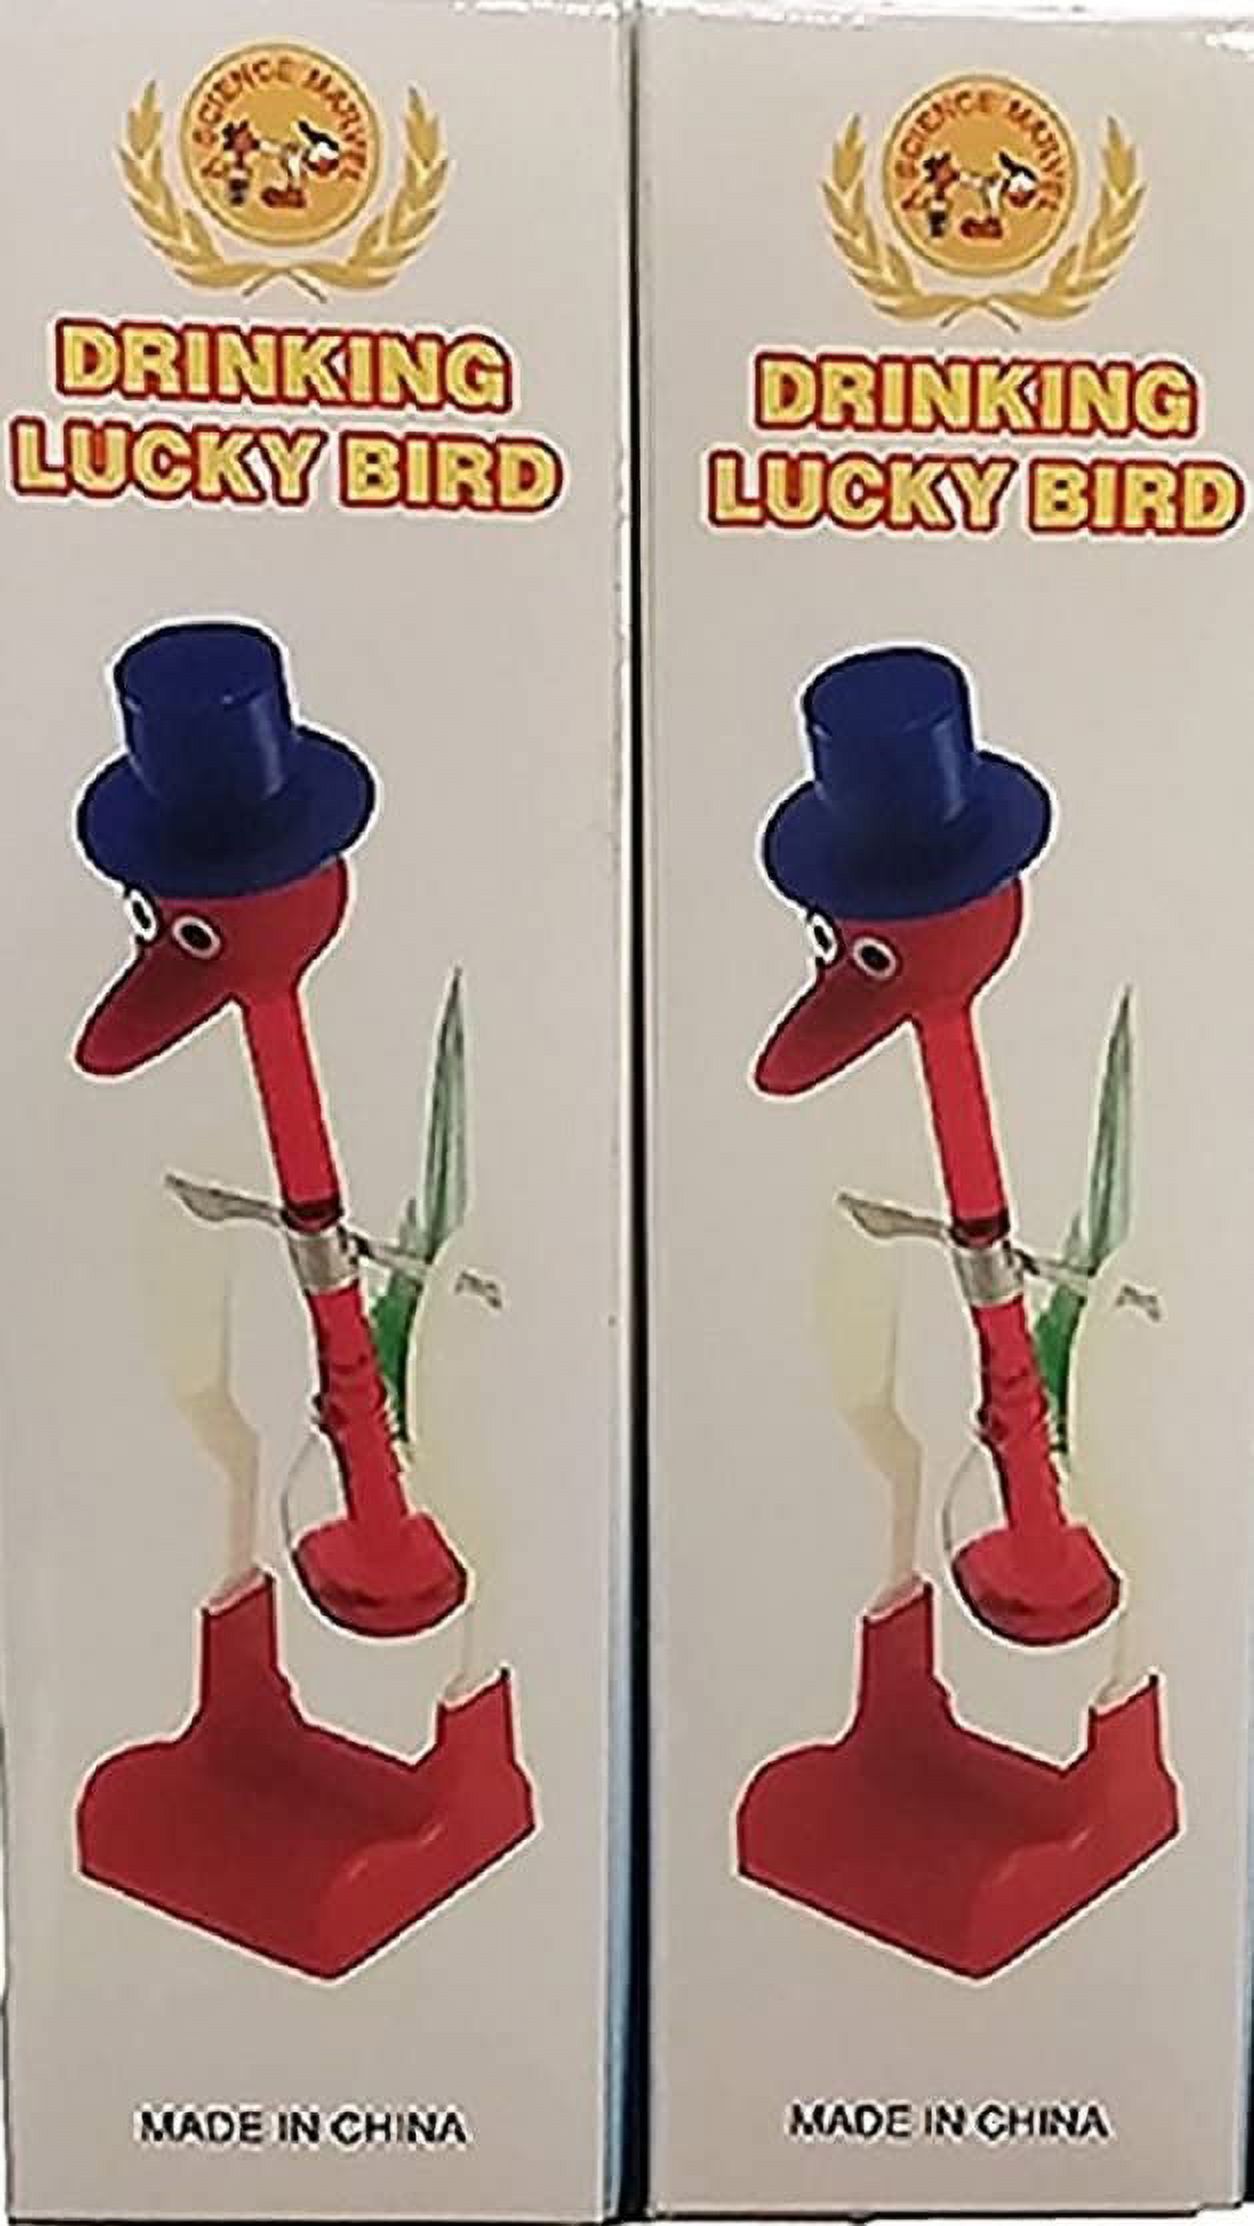 Drinking Bird Perpetual Motion (2 Pack) The Original Vintage Retro Magic Sippy Dipping Bird A Science Wonder Wholesale Bulk Set of 2-The Incredible Bird That Drinks Water - image 5 of 6